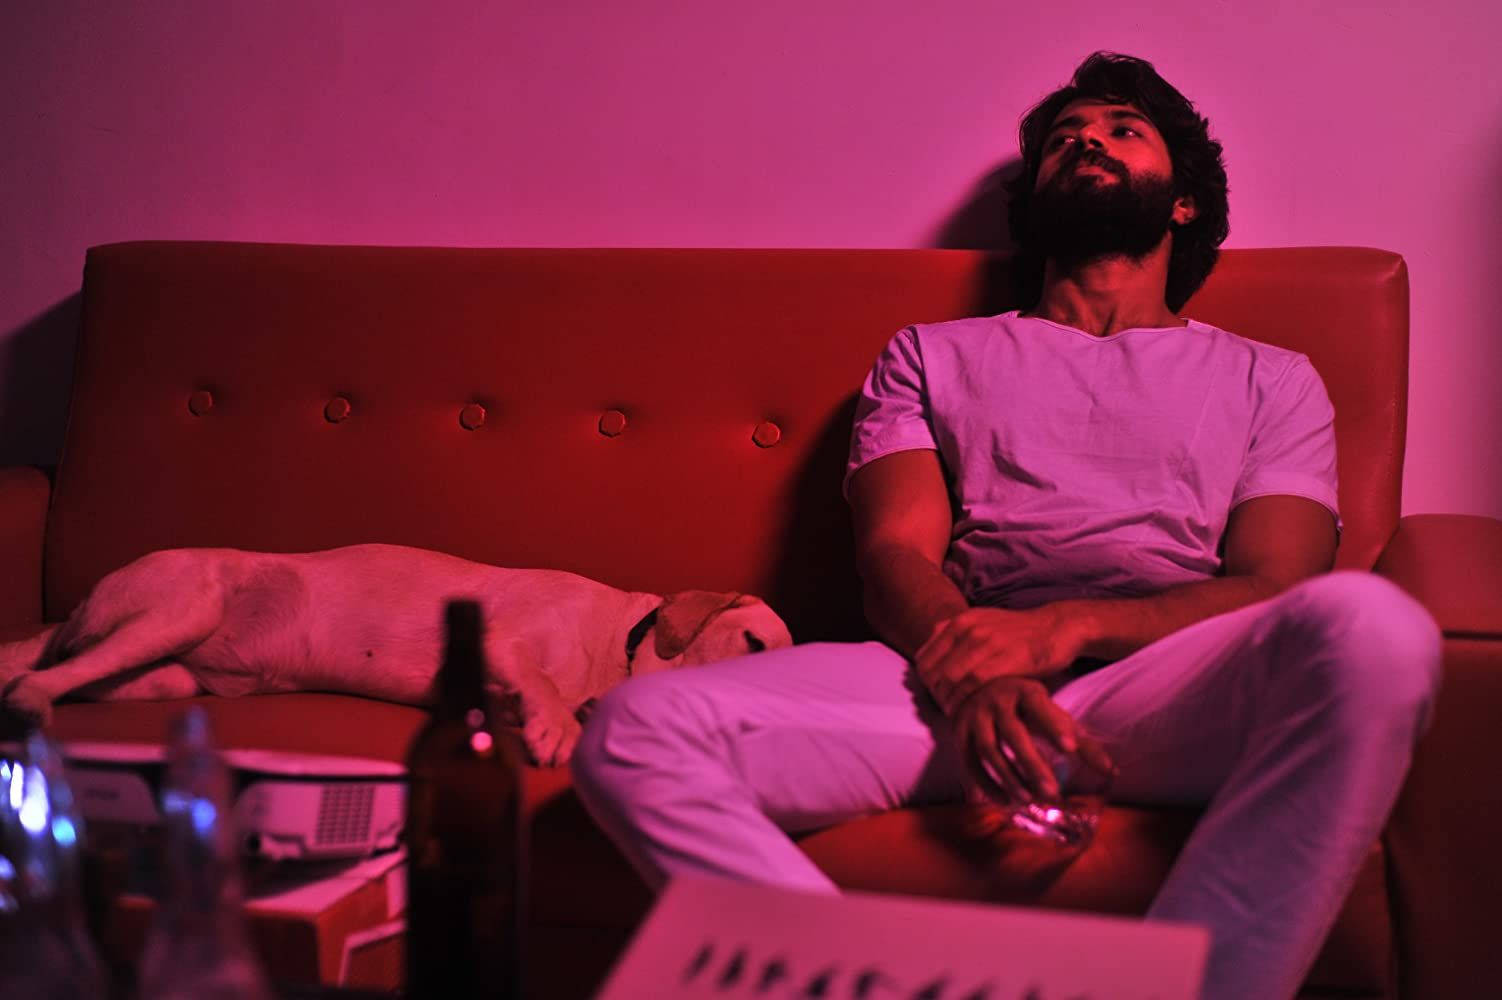 Striking Portrait Of Arjun Reddy From The Acclaimed Movie, Illuminated In Pink Light